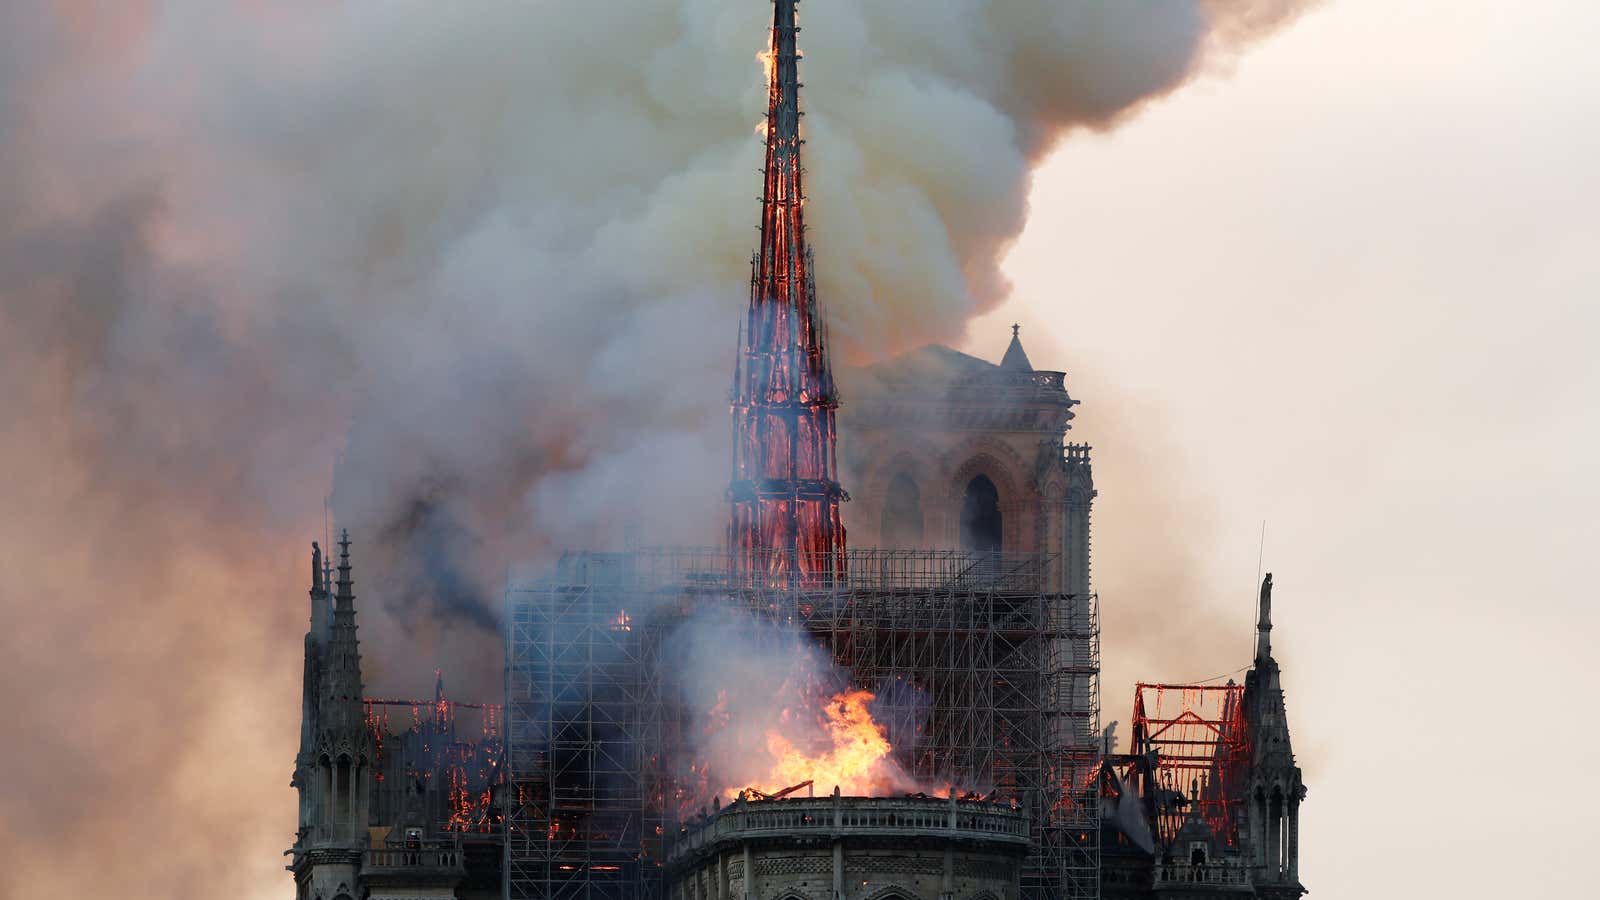 Smoke billows as fire engulfs the spire of Notre Dame cathedral.